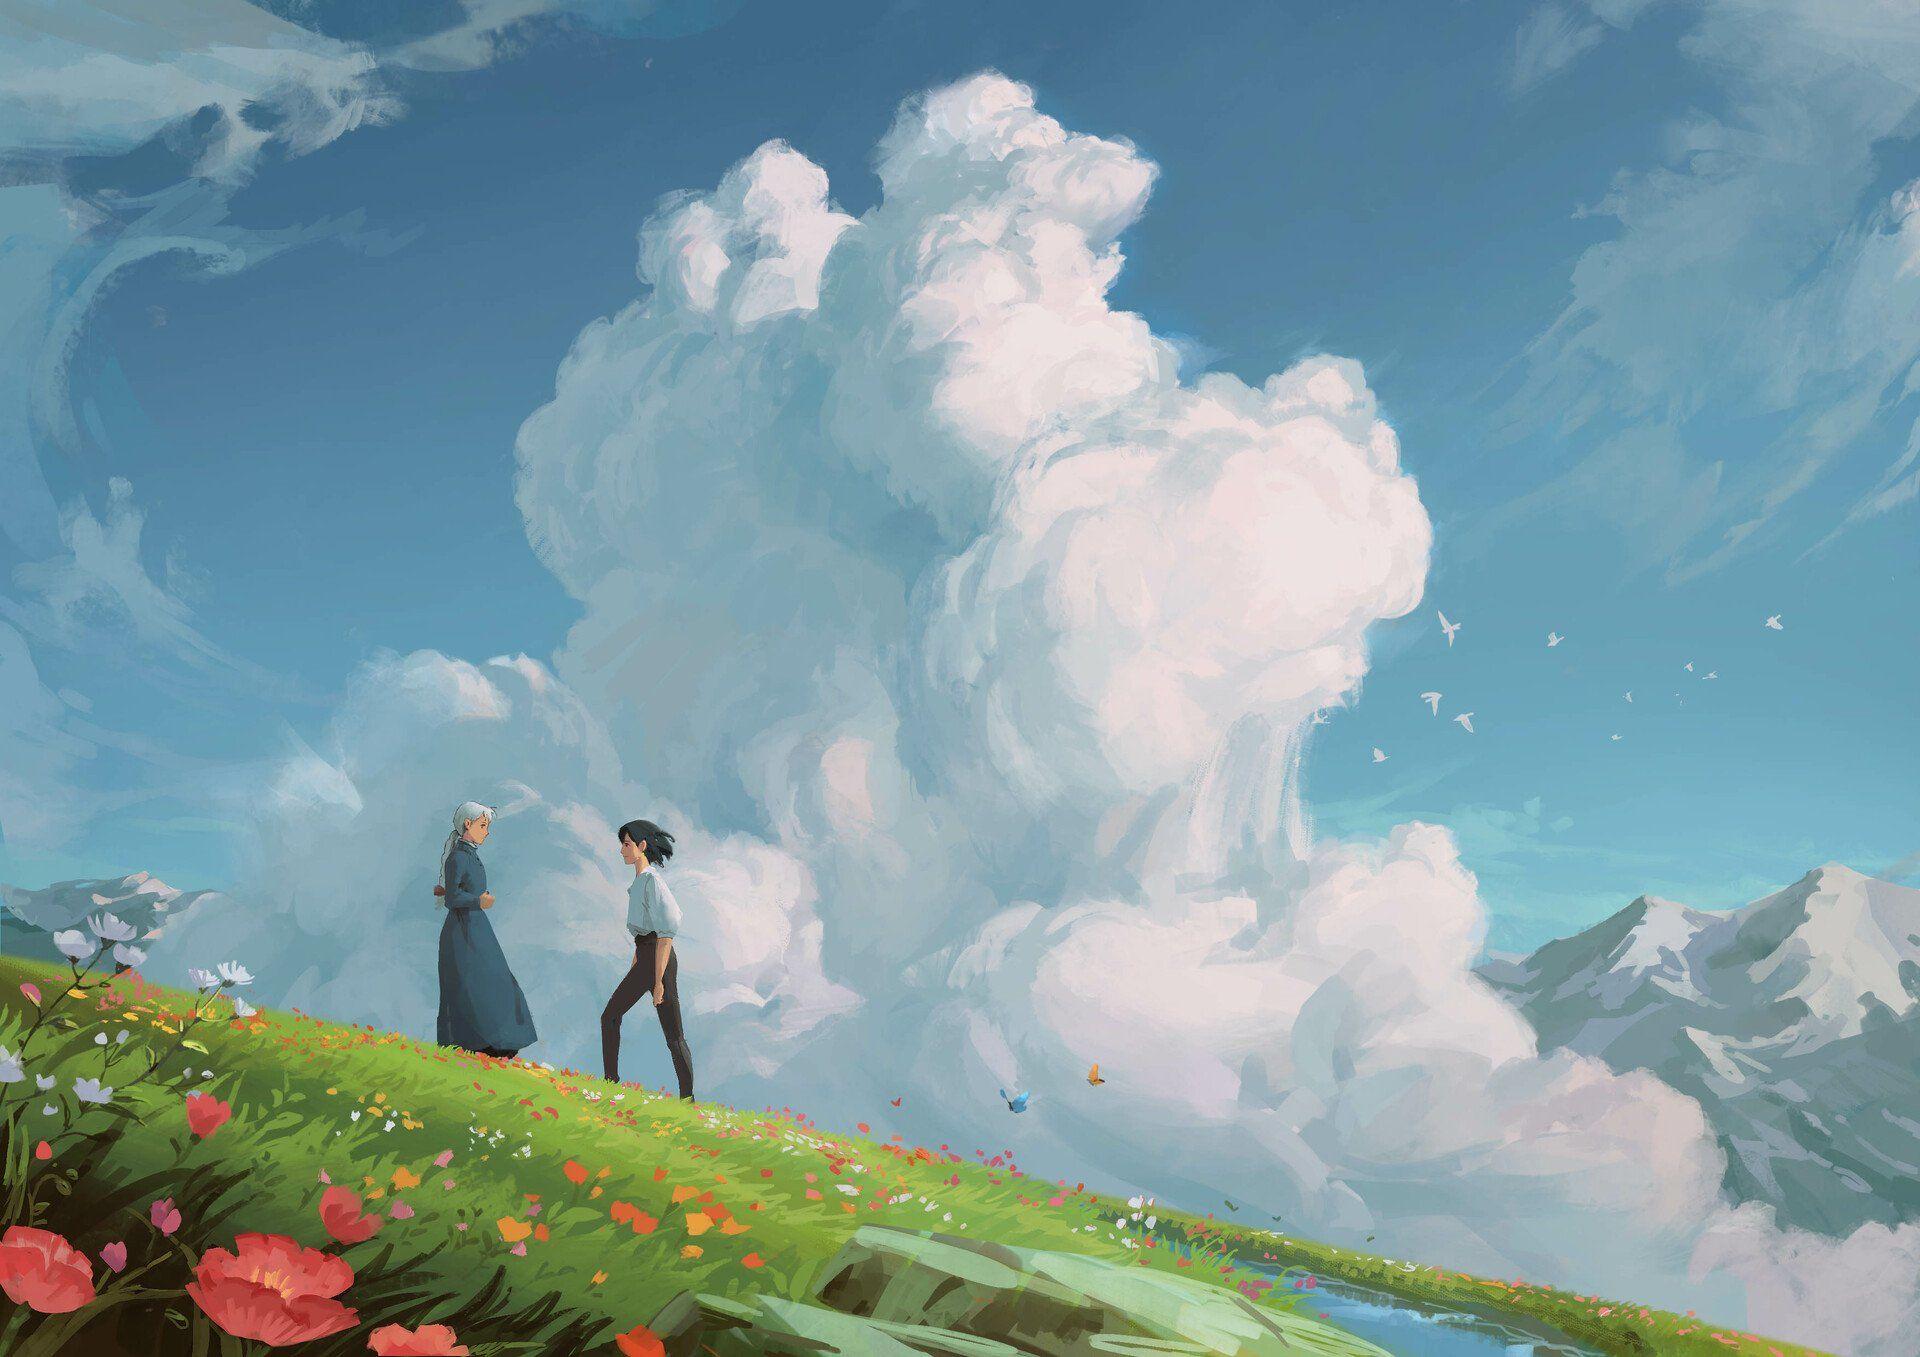 Howl And Sophie Wallpapers Top Free Howl And Sophie Backgrounds Wallpaperaccess